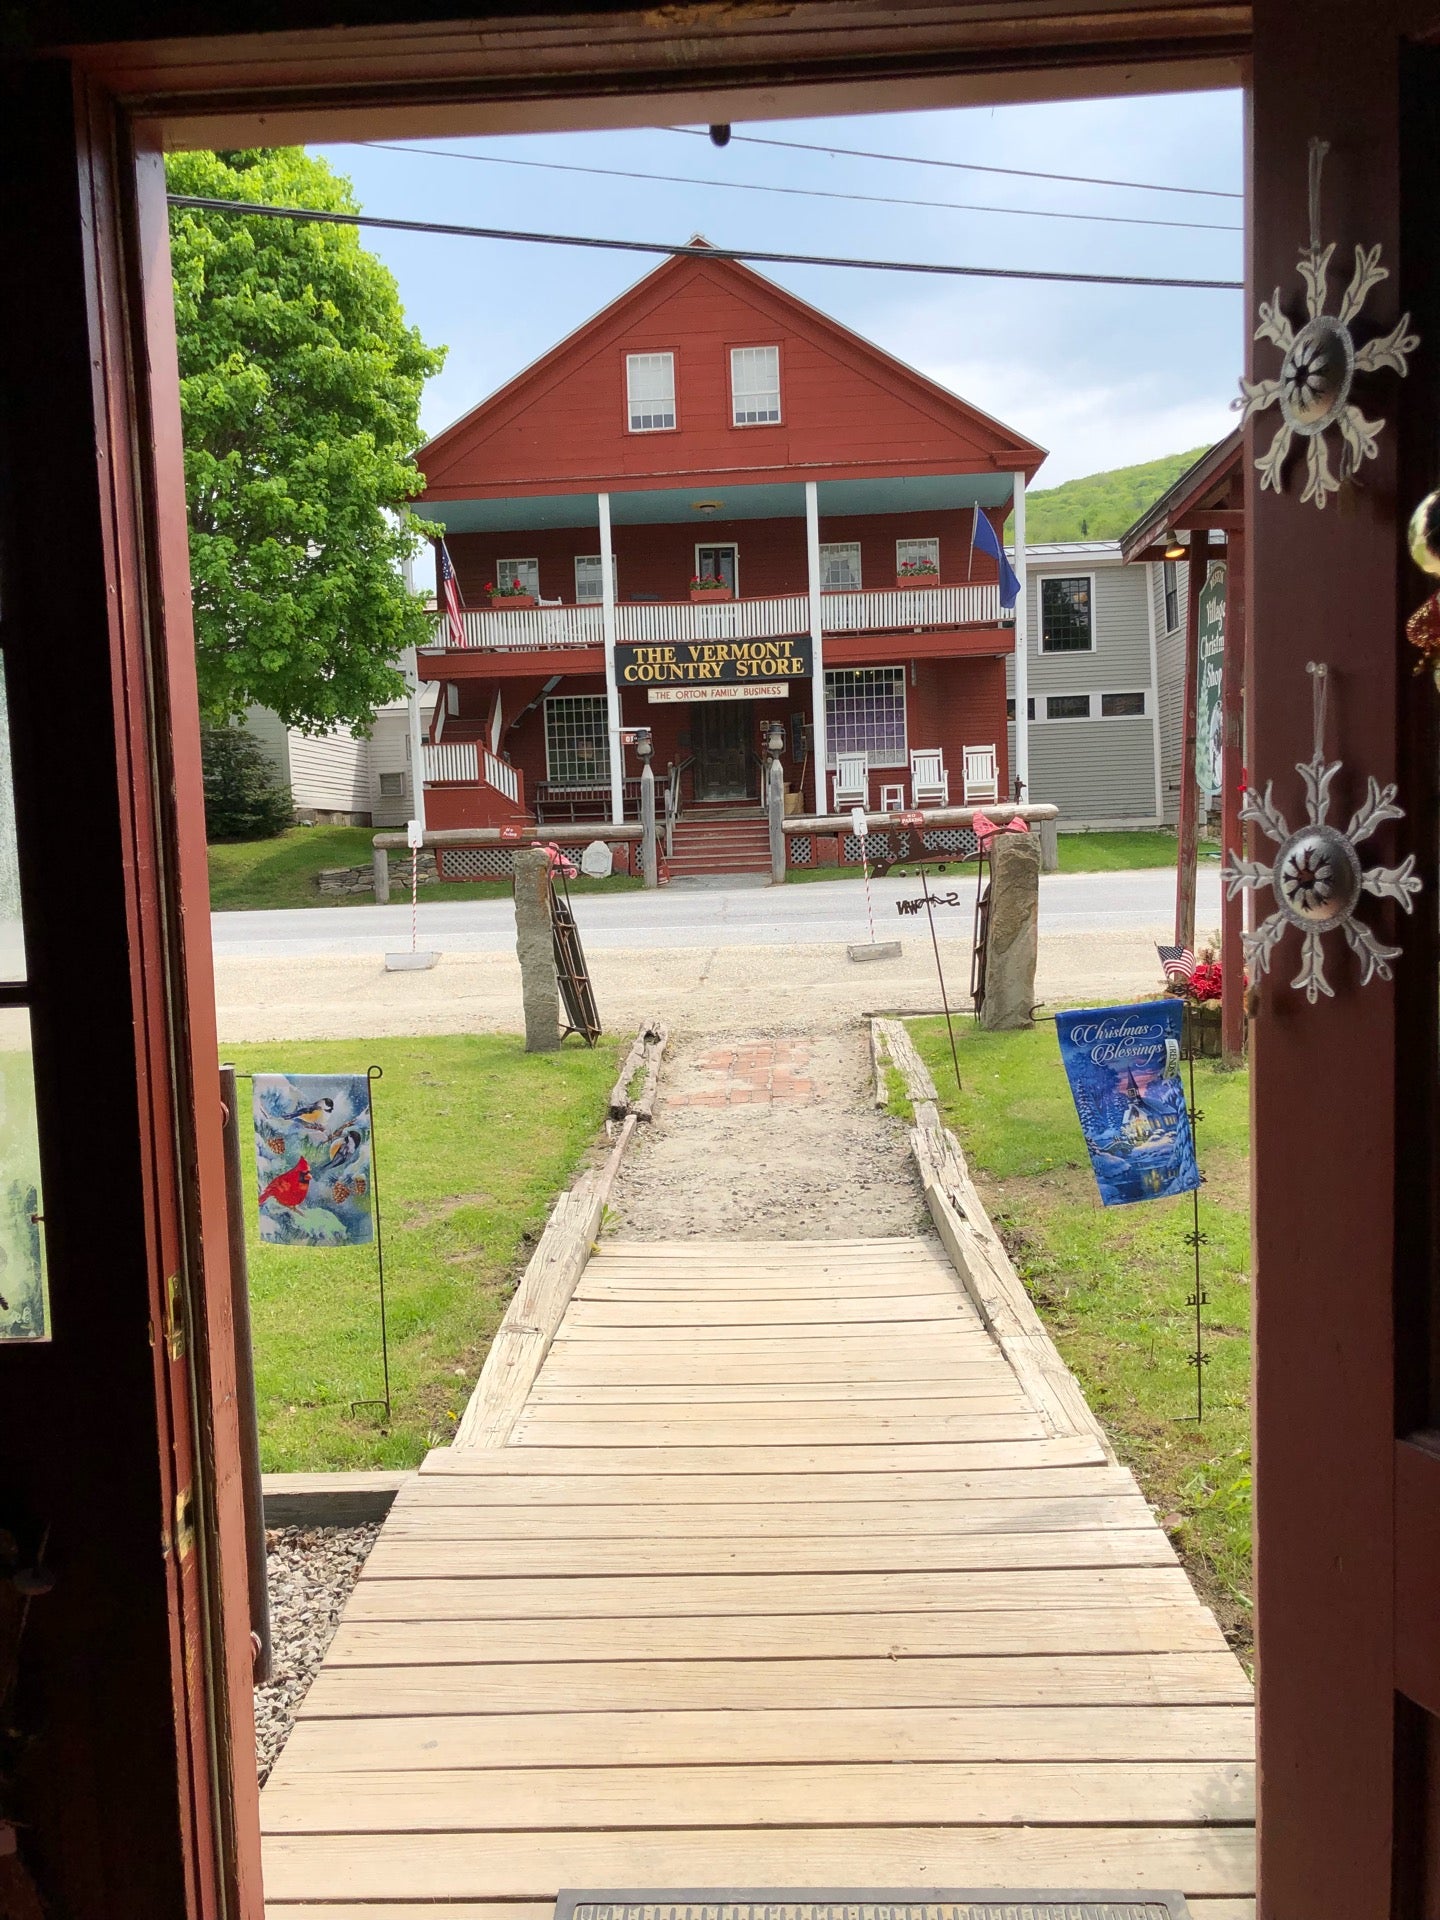 VERMONT COUNTRY STORE - 657 Main St, Weston, Vermont - Men's Clothing - Yelp